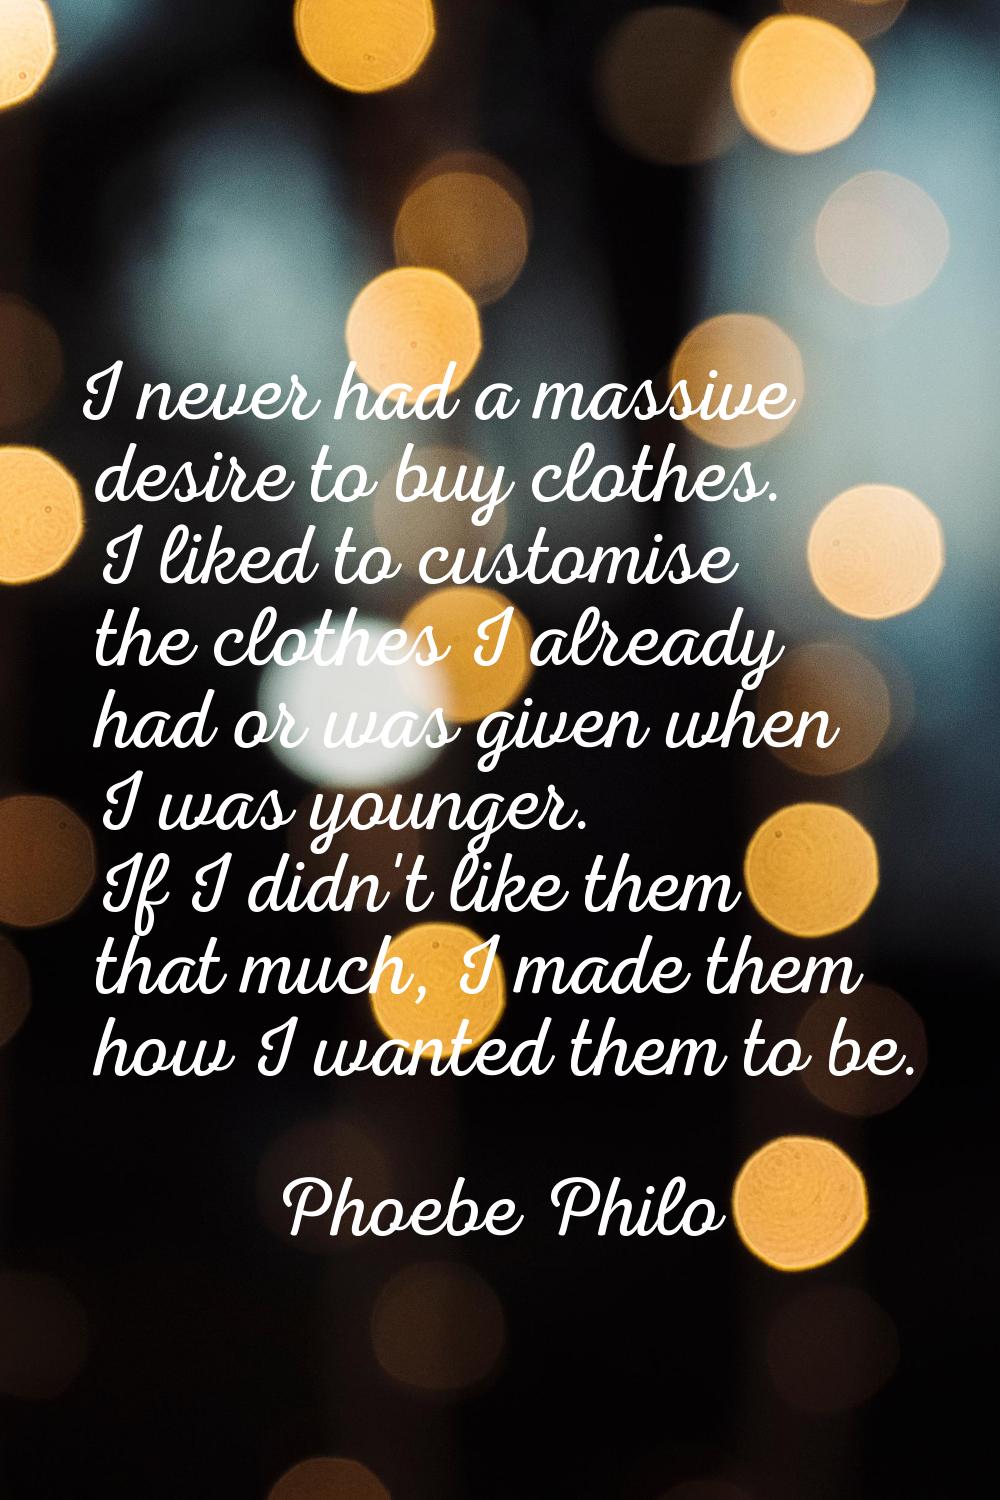 I never had a massive desire to buy clothes. I liked to customise the clothes I already had or was 